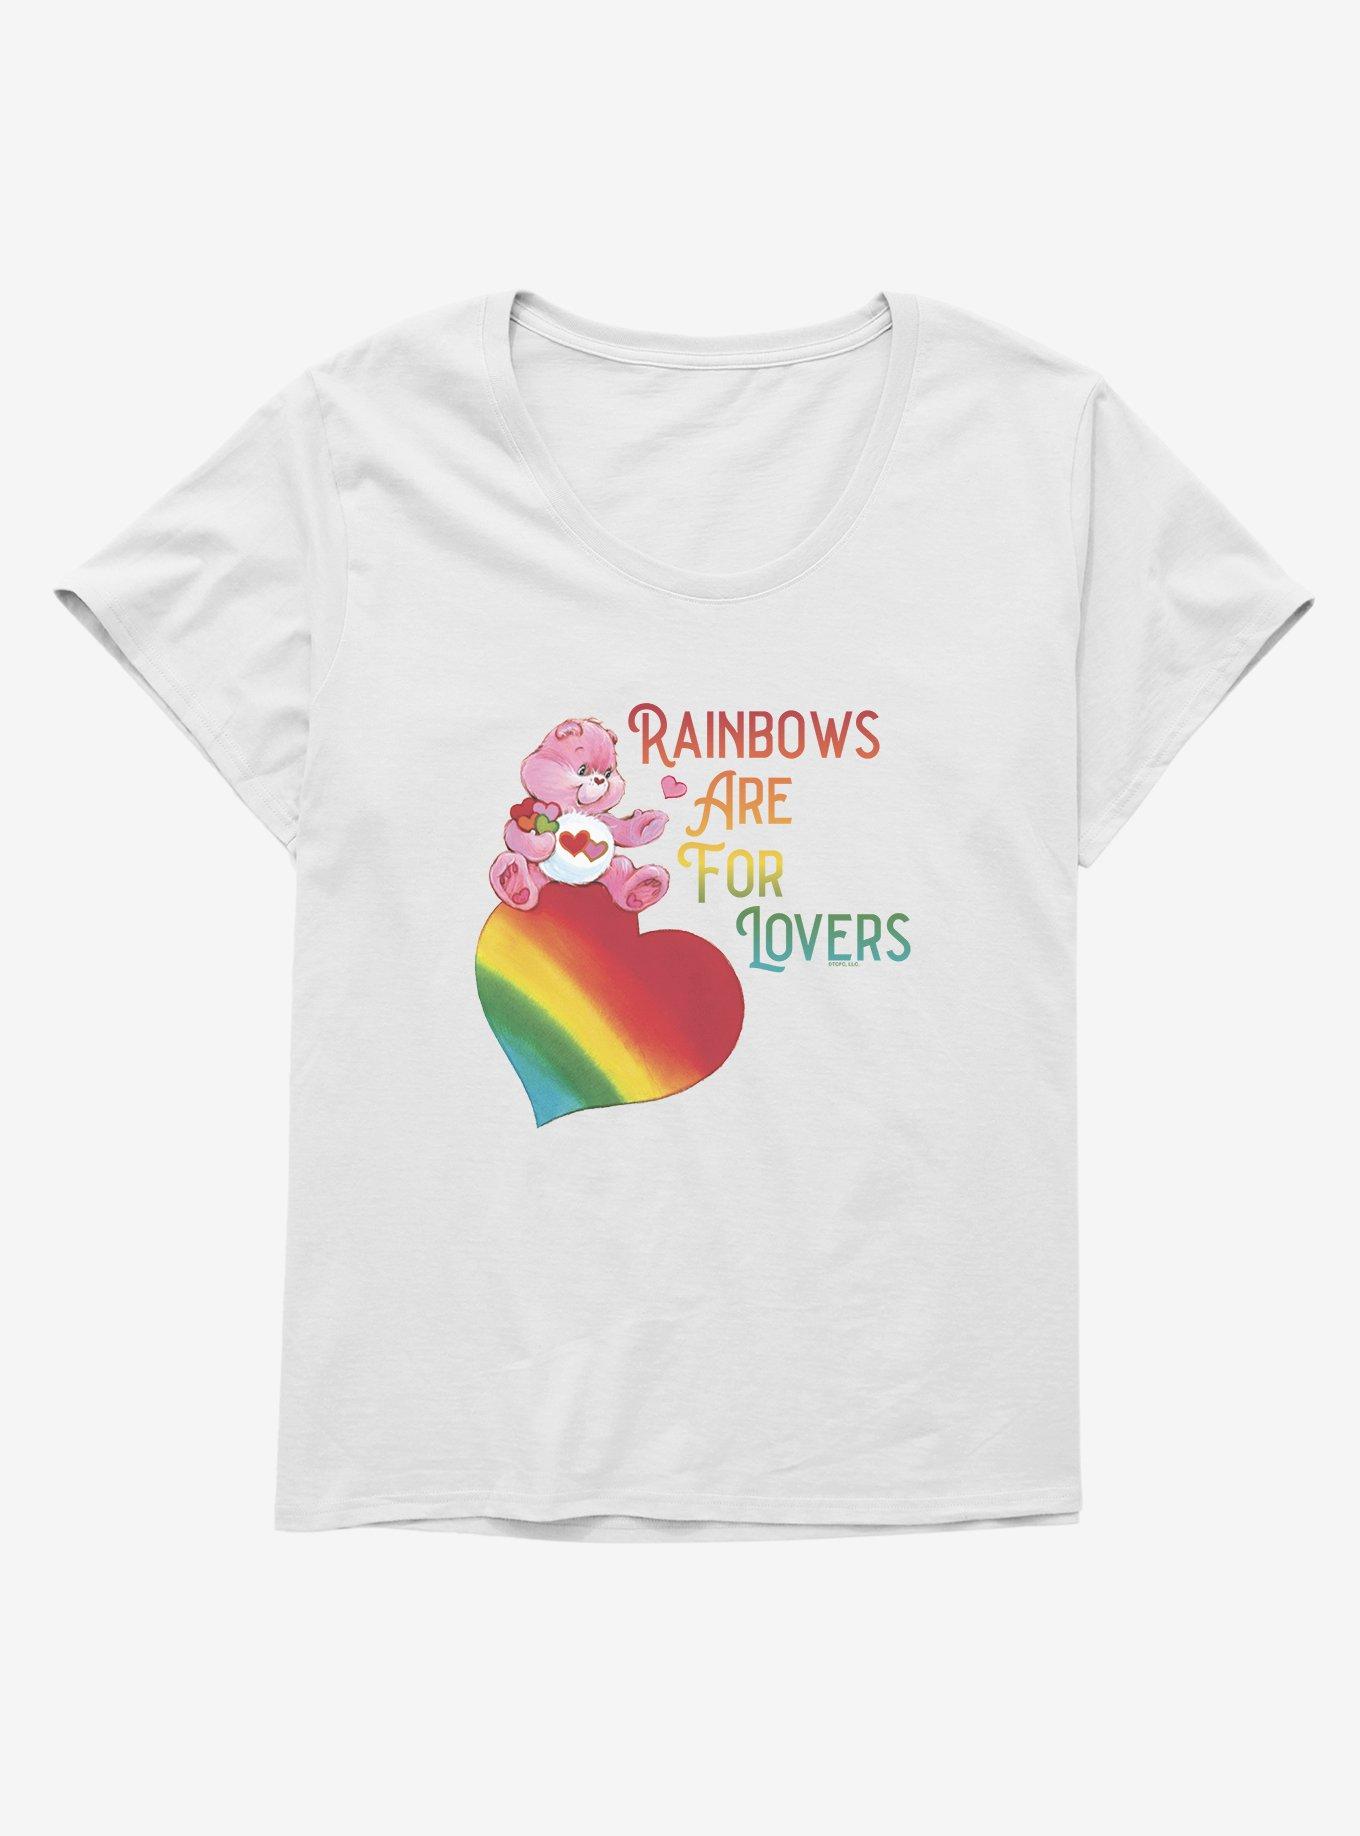 Care Bears Pride Love-A-Lot Bear Rainbows Are For Lovers Girls T-Shirt Plus Size, WHITE, hi-res